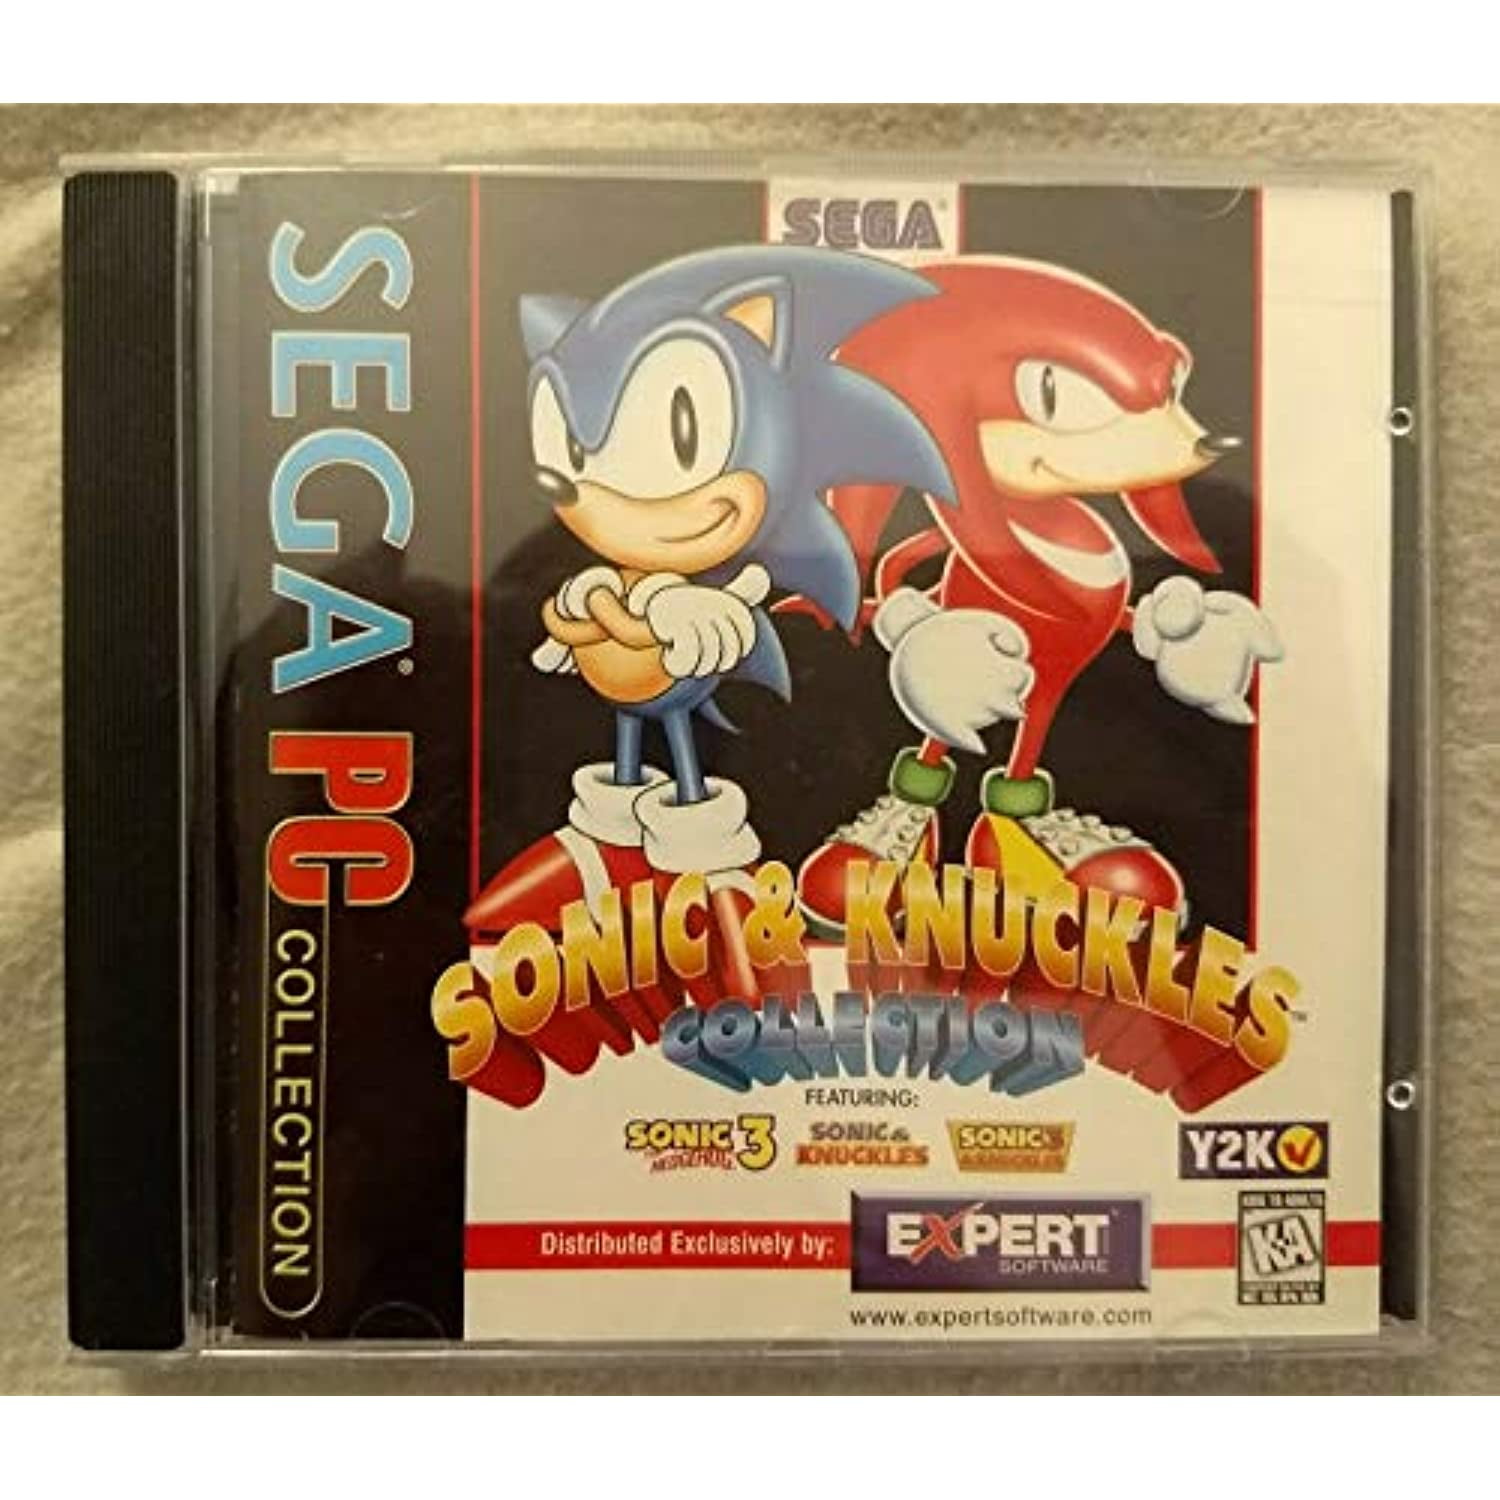 Sonic 3 and knuckles steam version фото 81